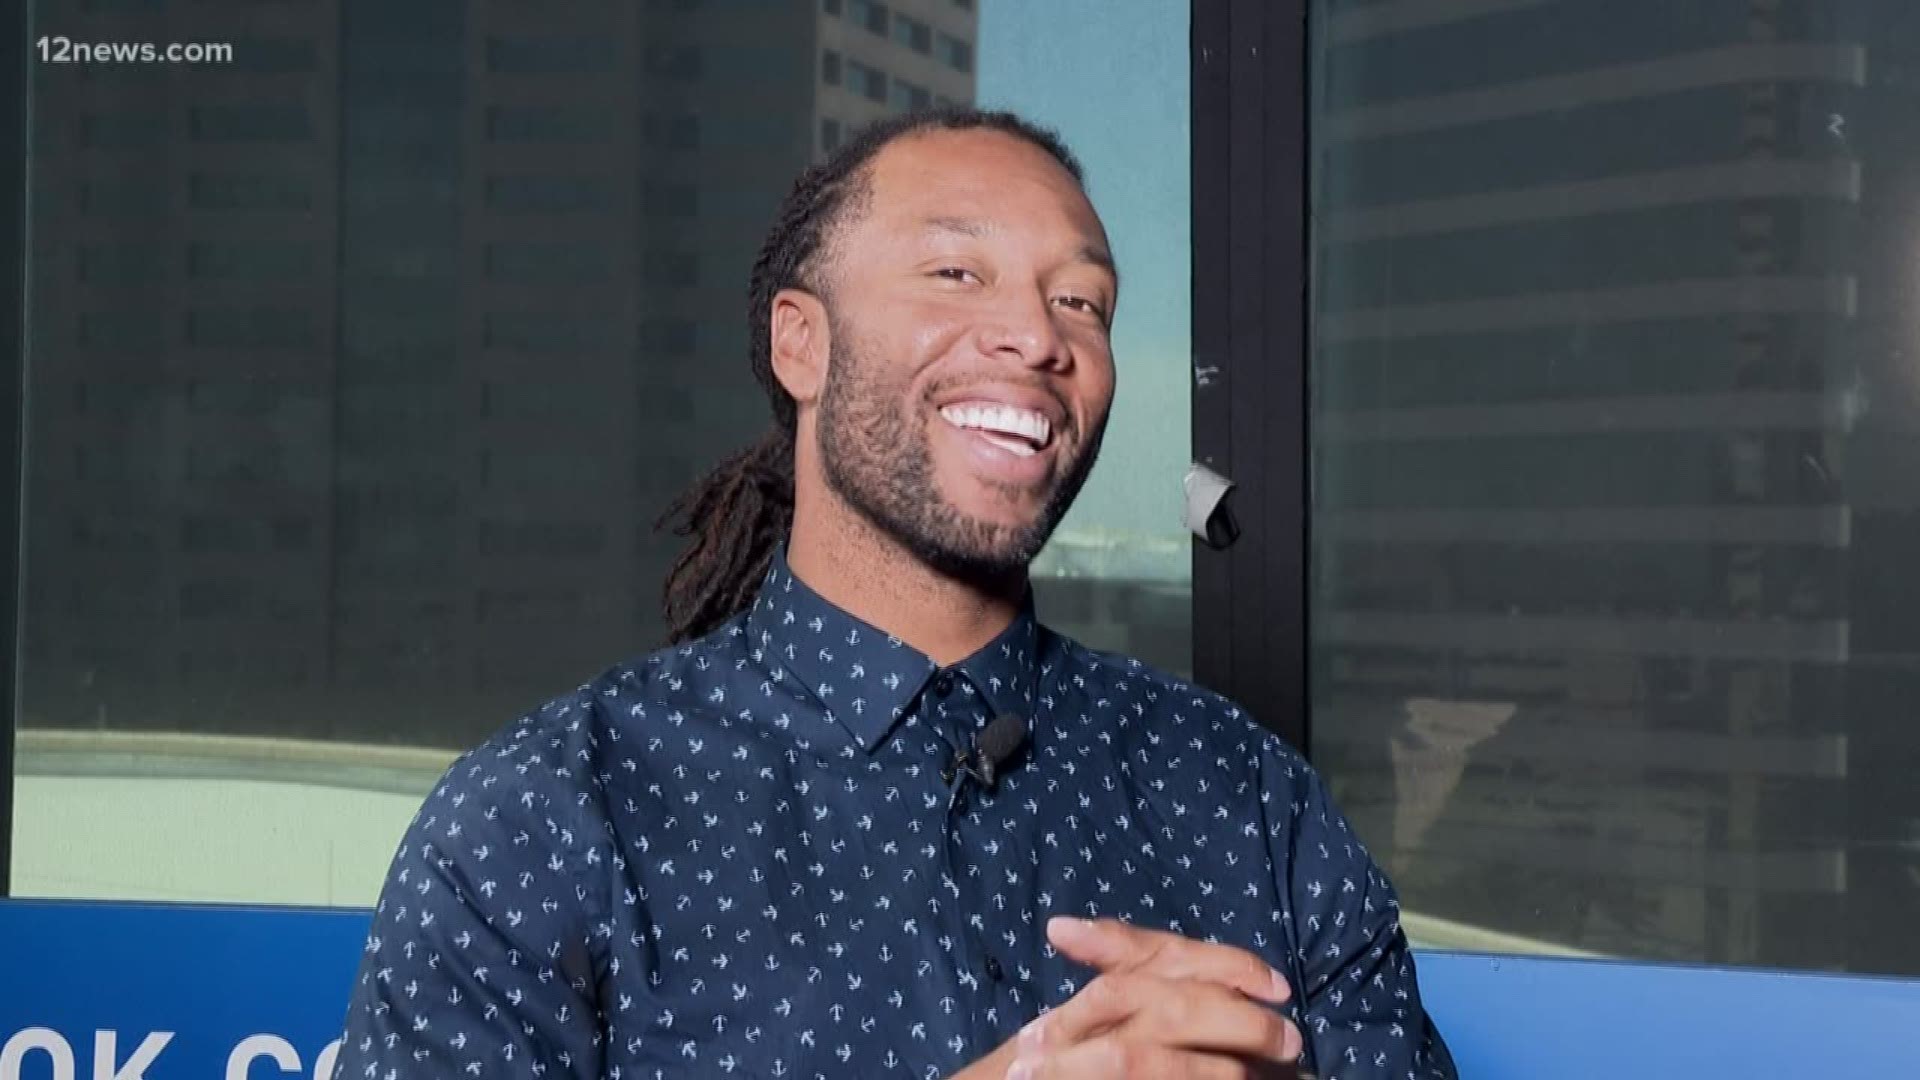 We are just days away from seeing Larry Fitzgerald and many of your favorite athletes and celebrities take the Salt River Fields Diamond for Fitz's 9th annual celebrity softball game! Larry Legend himself sat down with Paul Gerke to tell us about this year's game and give his thoughts on what the Cards should do with the number one pick for the NFL draft.